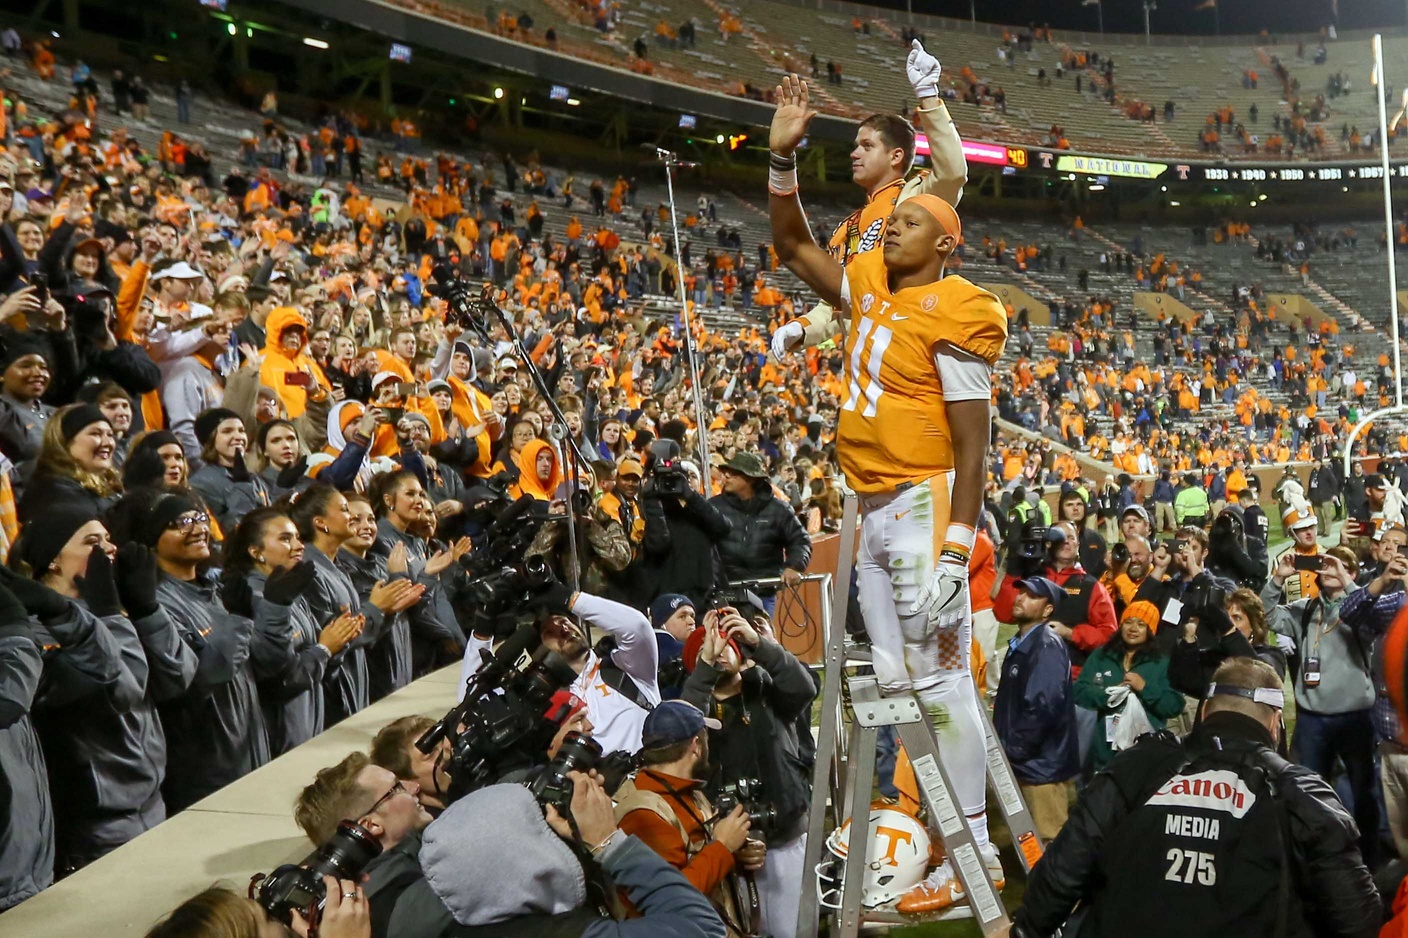 Nov 19, 2016; Knoxville, TN, USA; Tennessee Volunteers quarterback Joshua Dobbs (11) directs the band after the game against the Missouri Tigers at Neyland Stadium. Tennessee won 63 to 37. Mandatory Credit: Randy Sartin-USA TODAY Sports